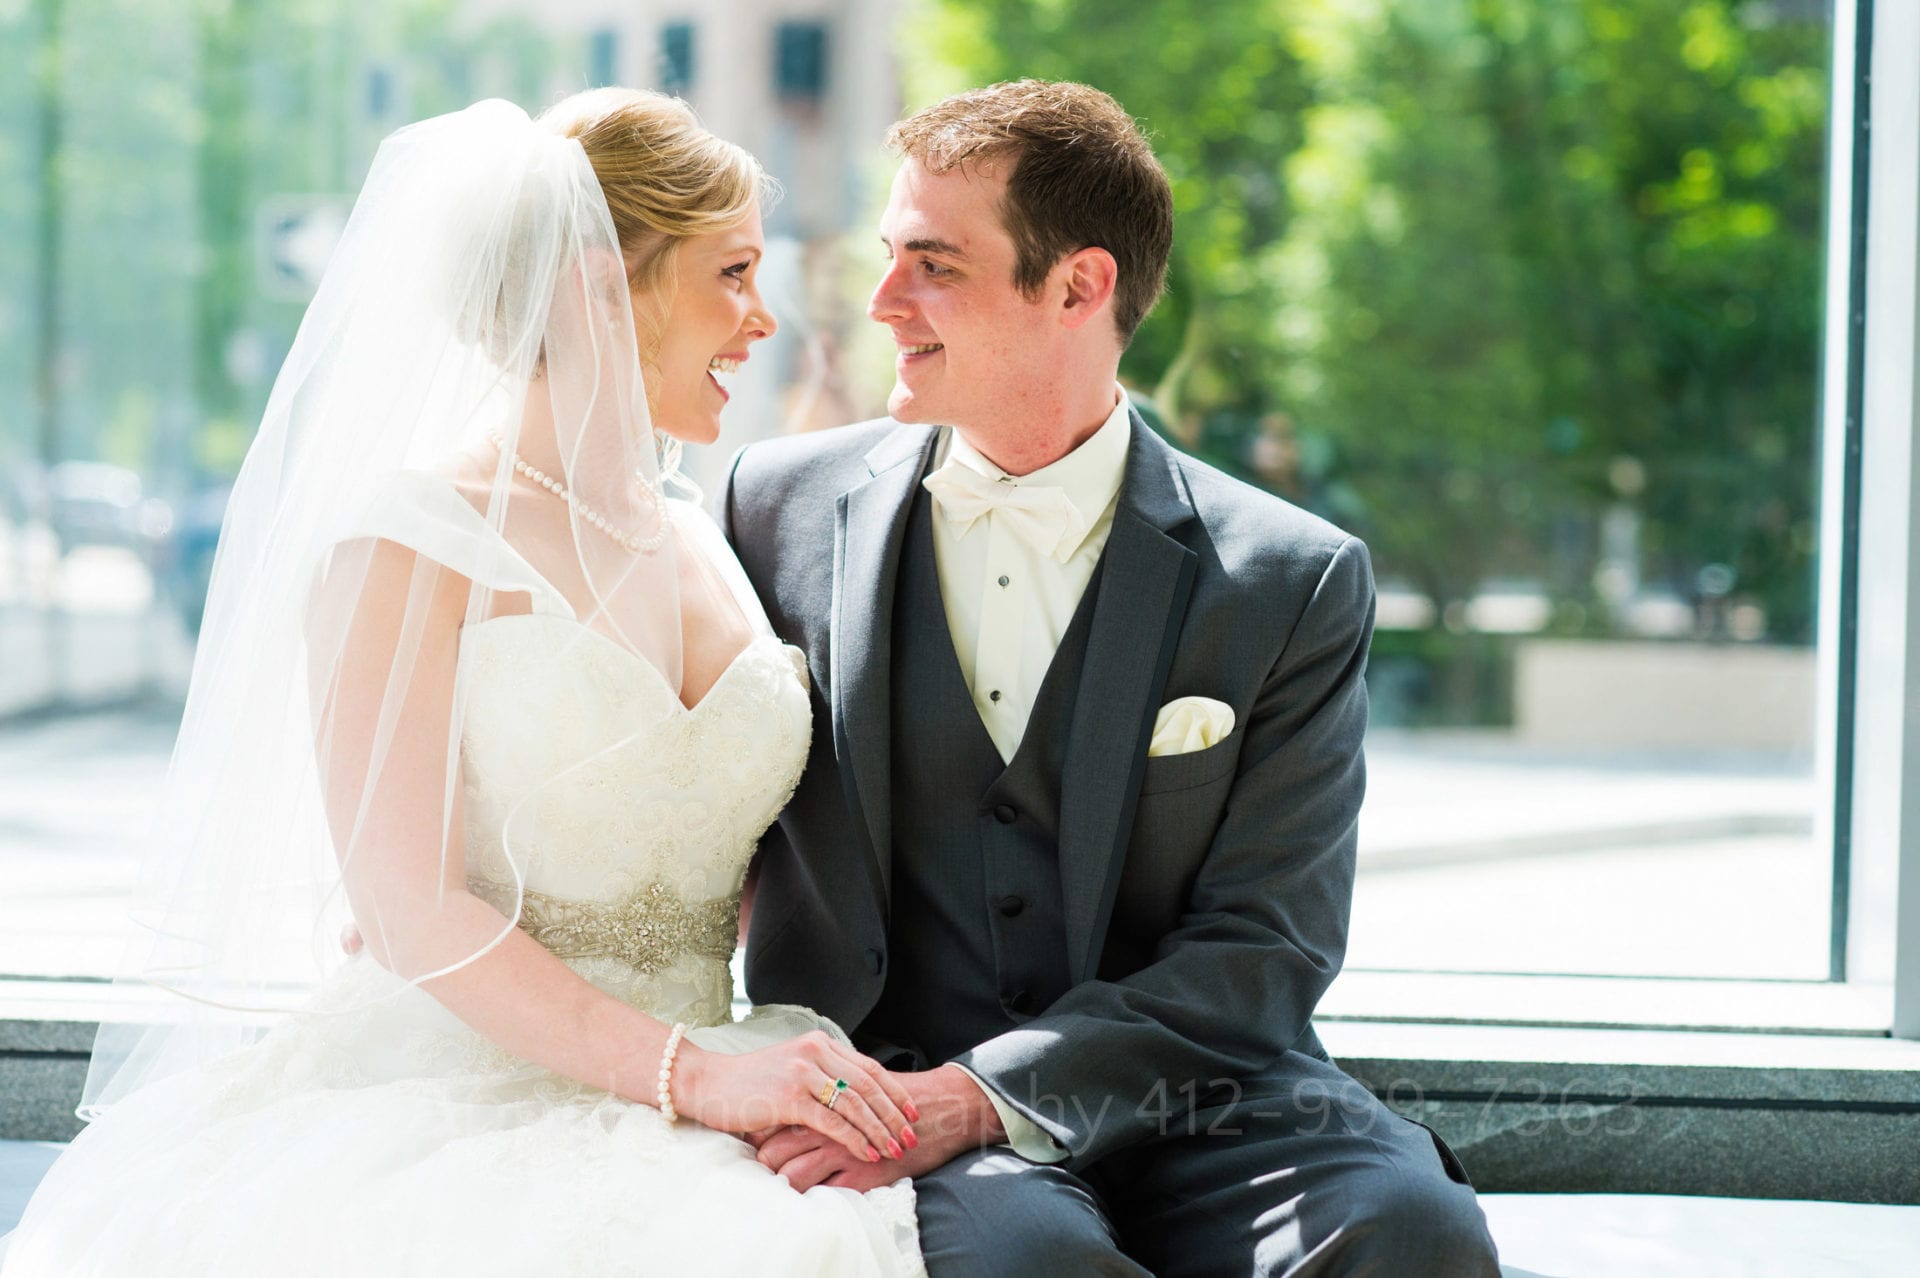 A bride and groom sit together and smile at one another in front of a window on a sunny day Fairmont Hotel Pittsburgh Weddings.